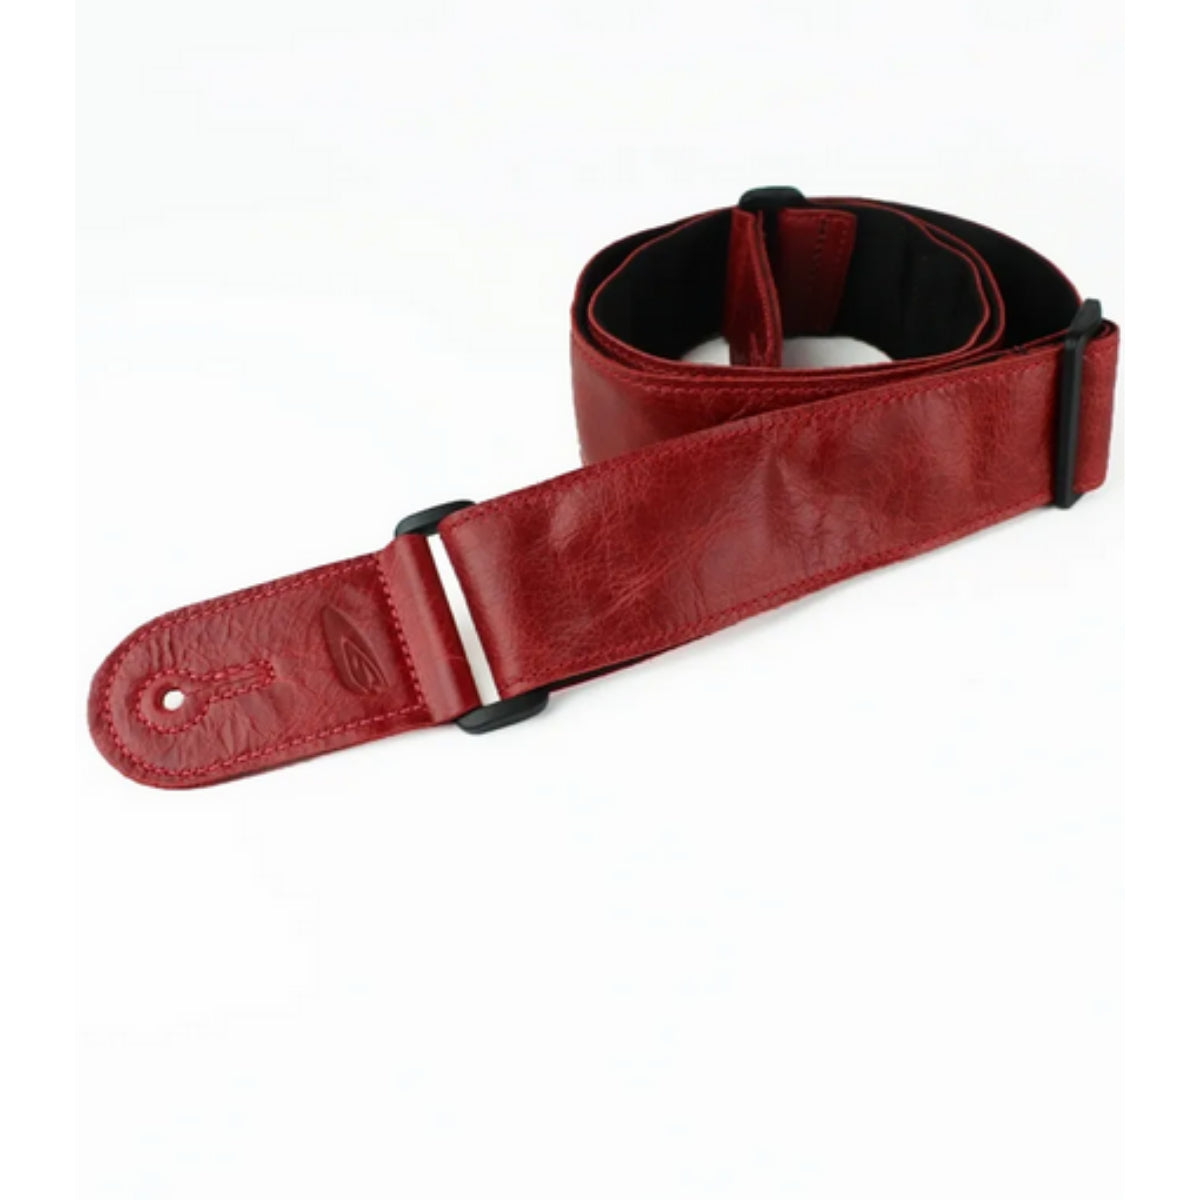 Adjustable Leather Strap, Leather, Red